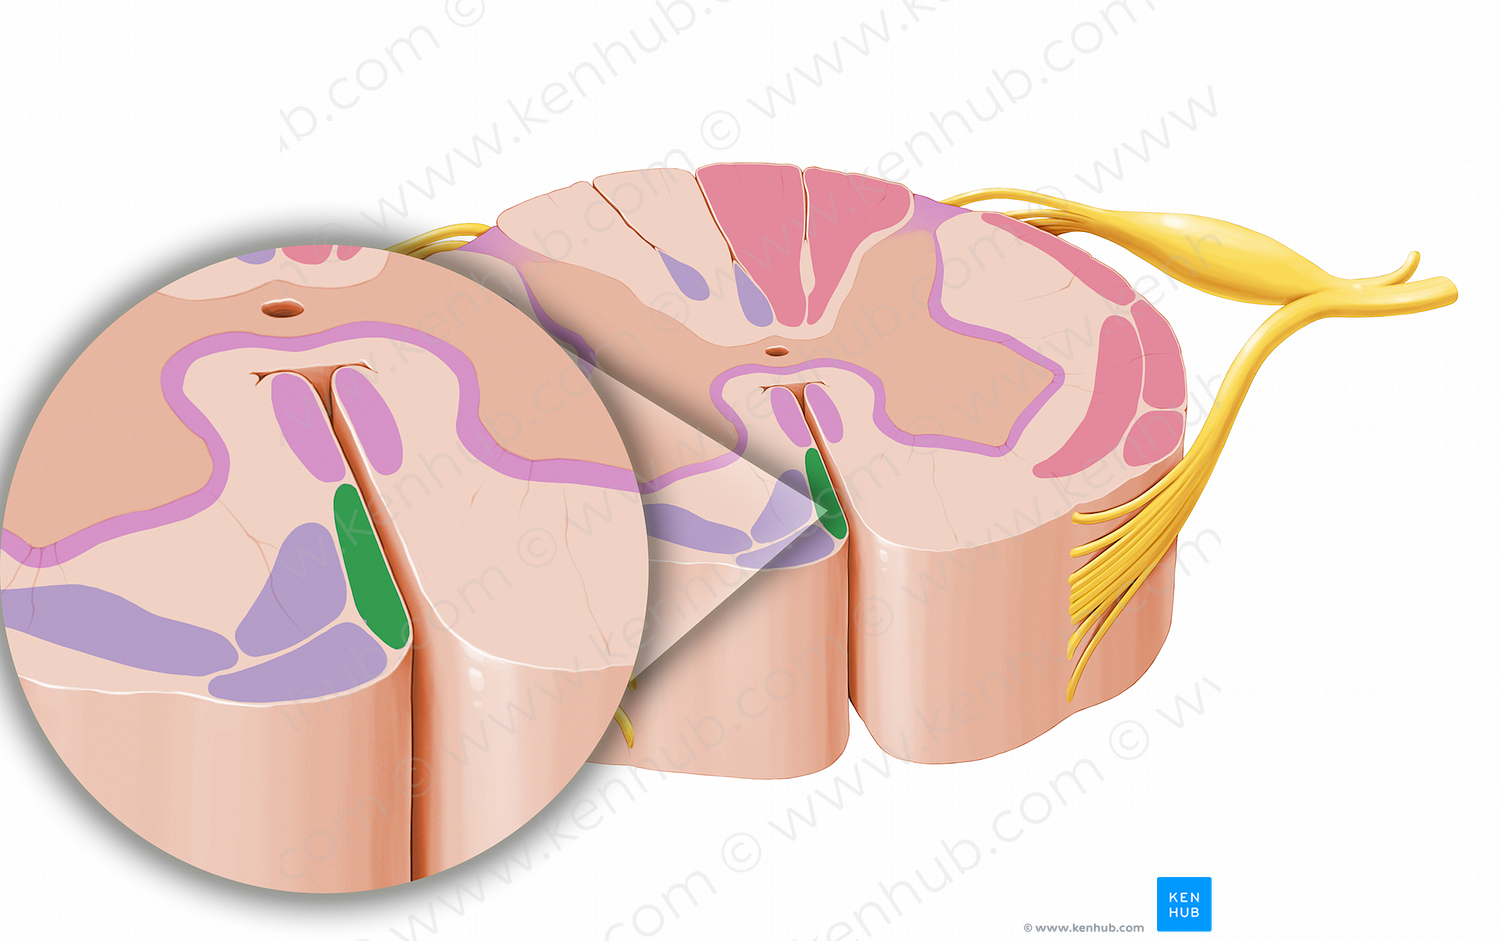 Anterior corticospinal tract (#12023)